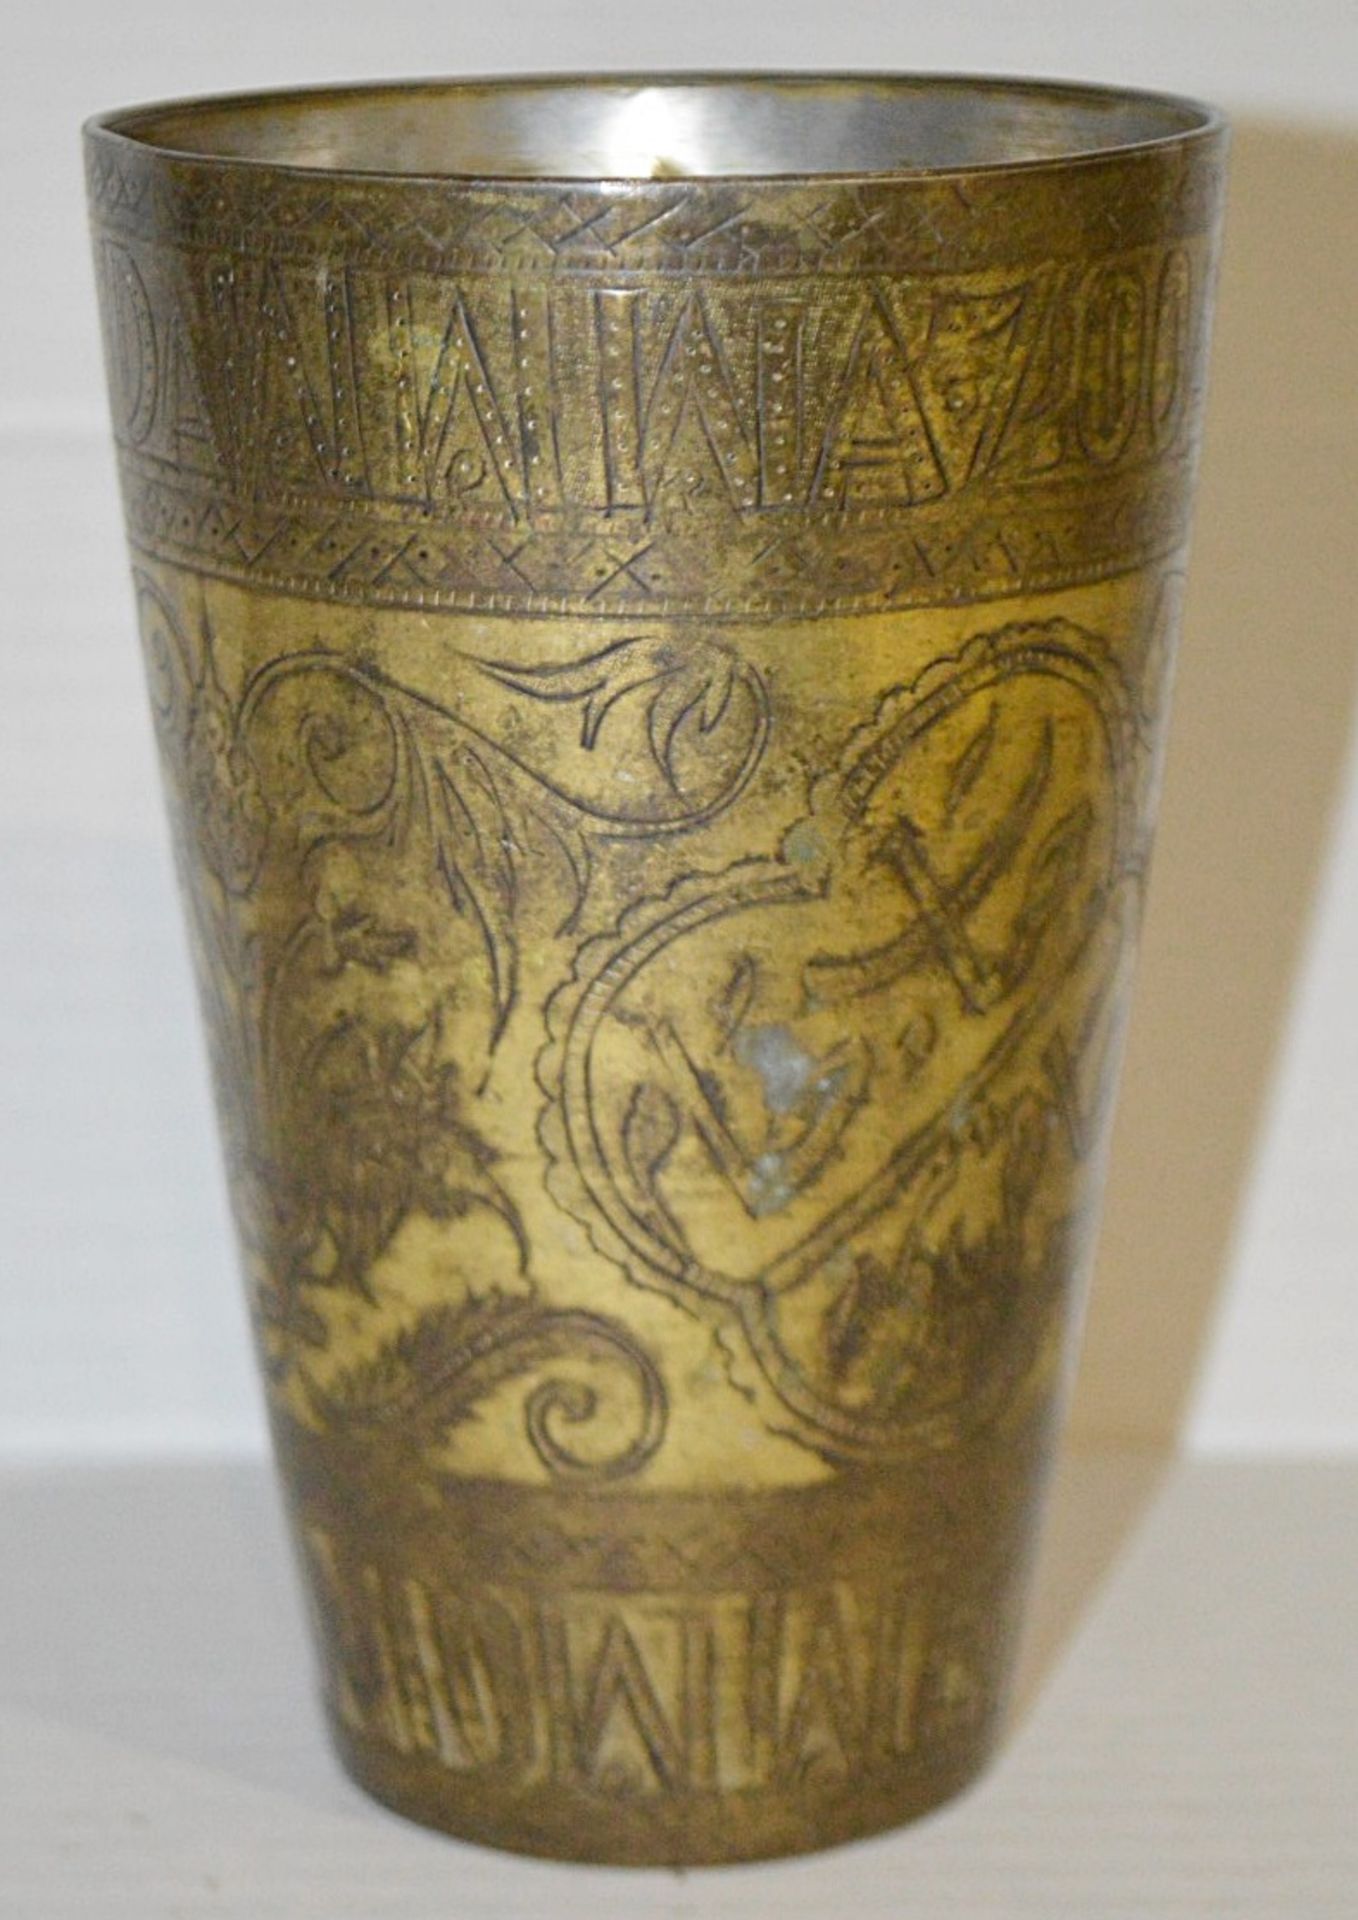 1 x Persian Gilded Tinner Beaker - Decorated With Floral Design And Scripture - Height: 14.5cm (5. - Image 2 of 6